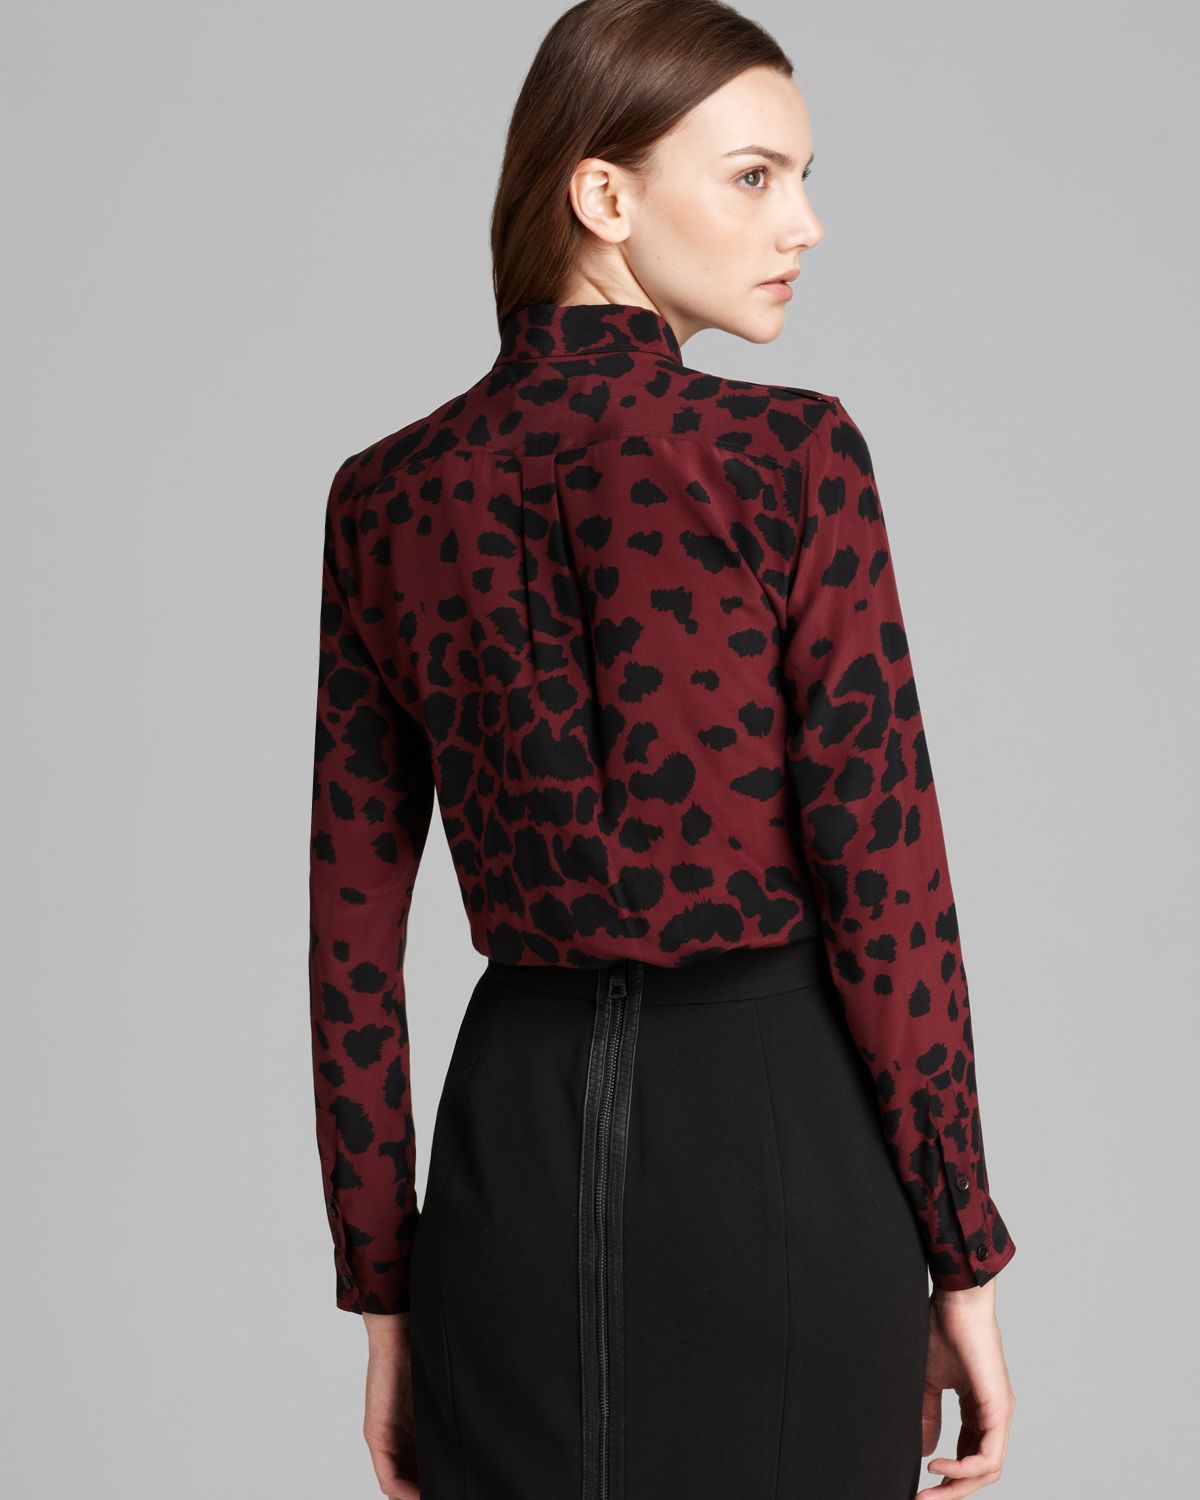 Lyst - Burberry Blouse Deep Claret Leopard in Red